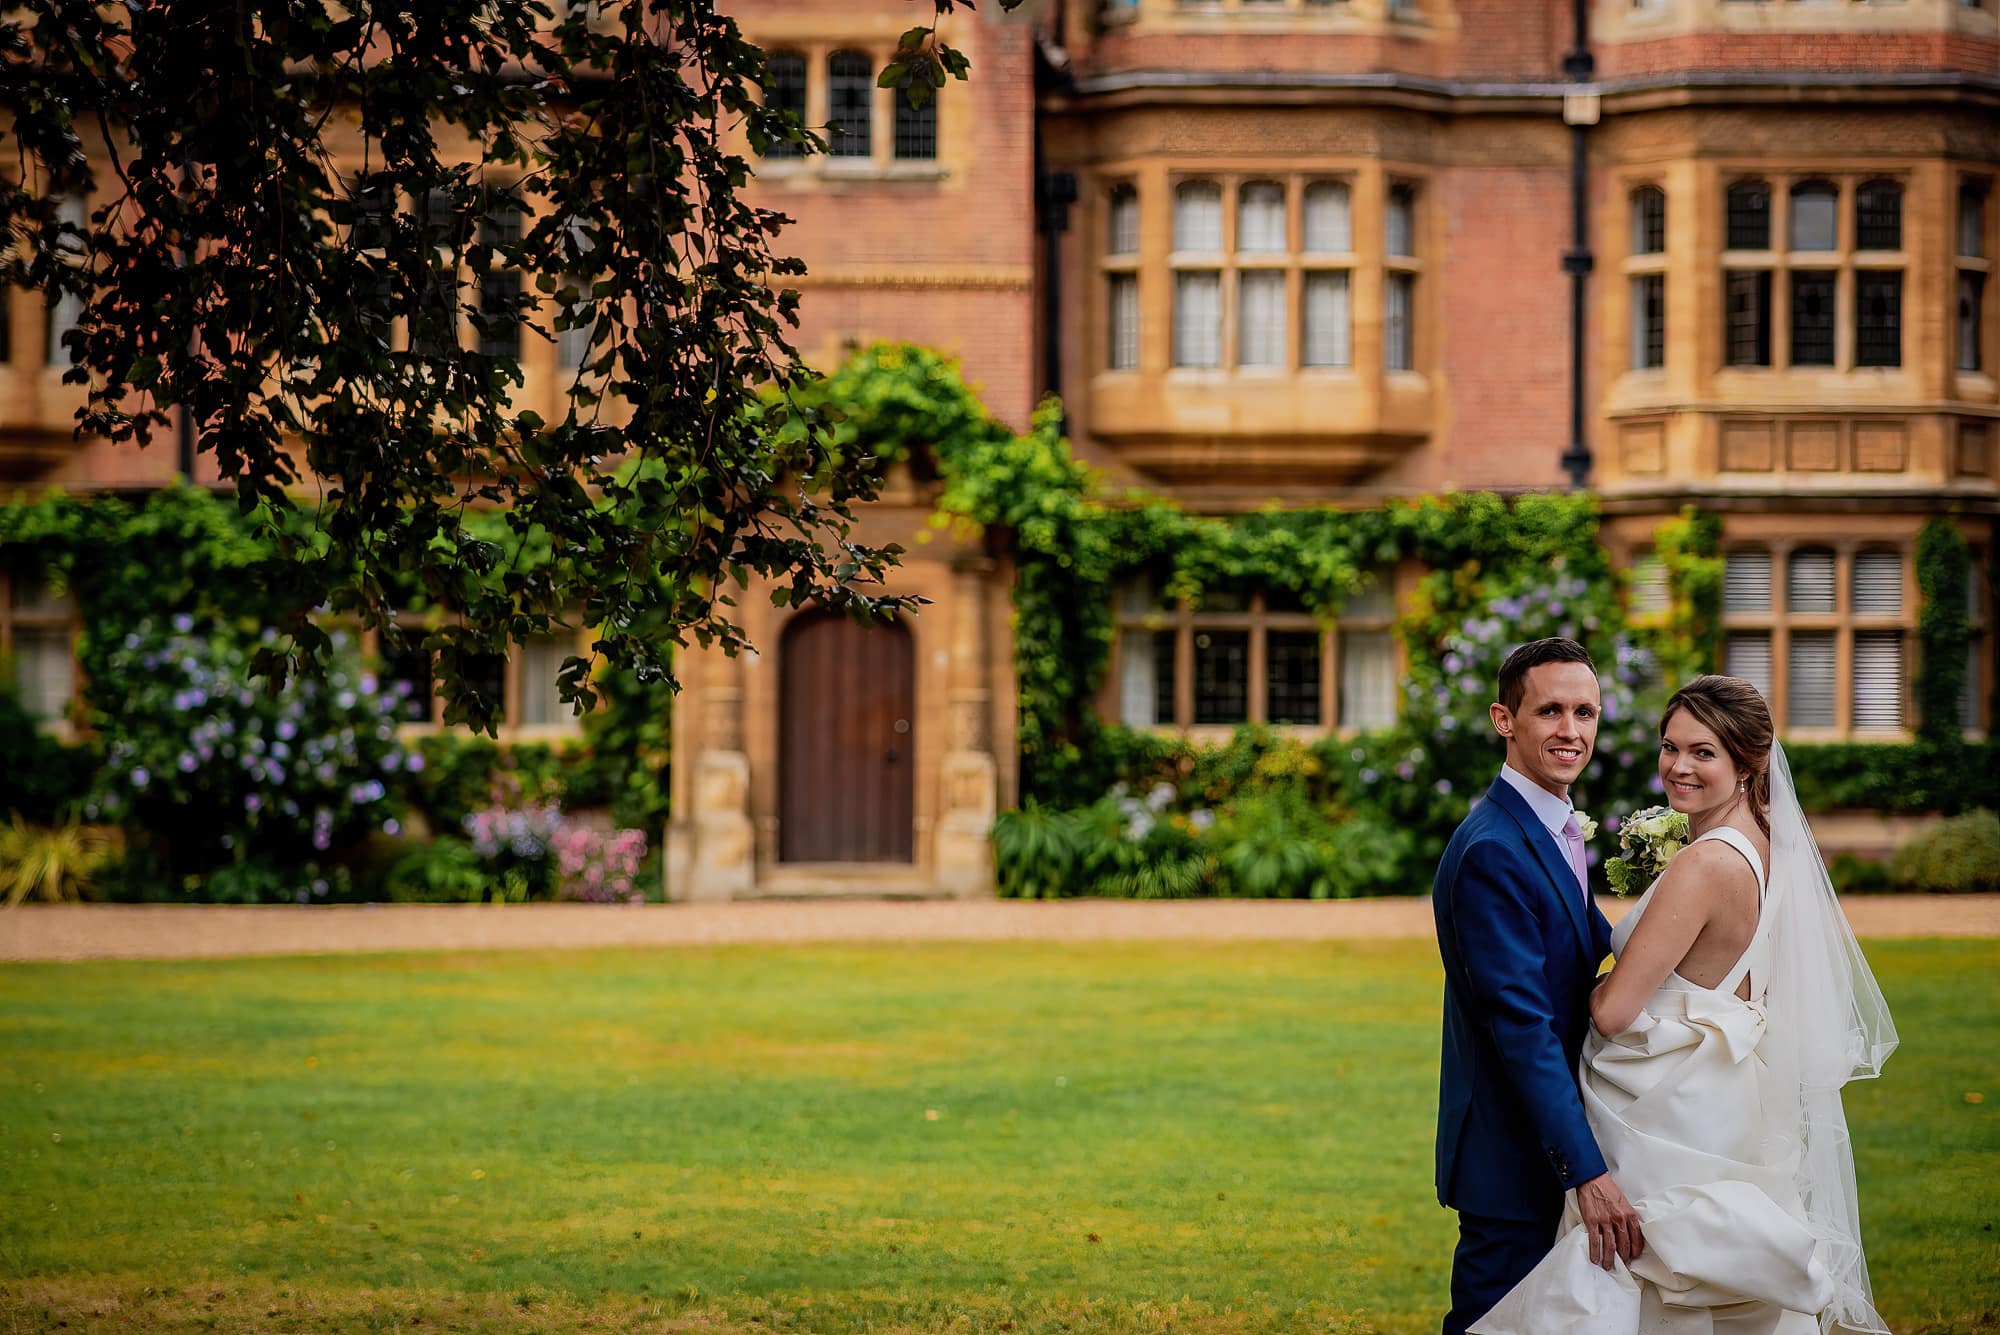 Newlyweds in the grounds of Trinity Hall college in Cambridge